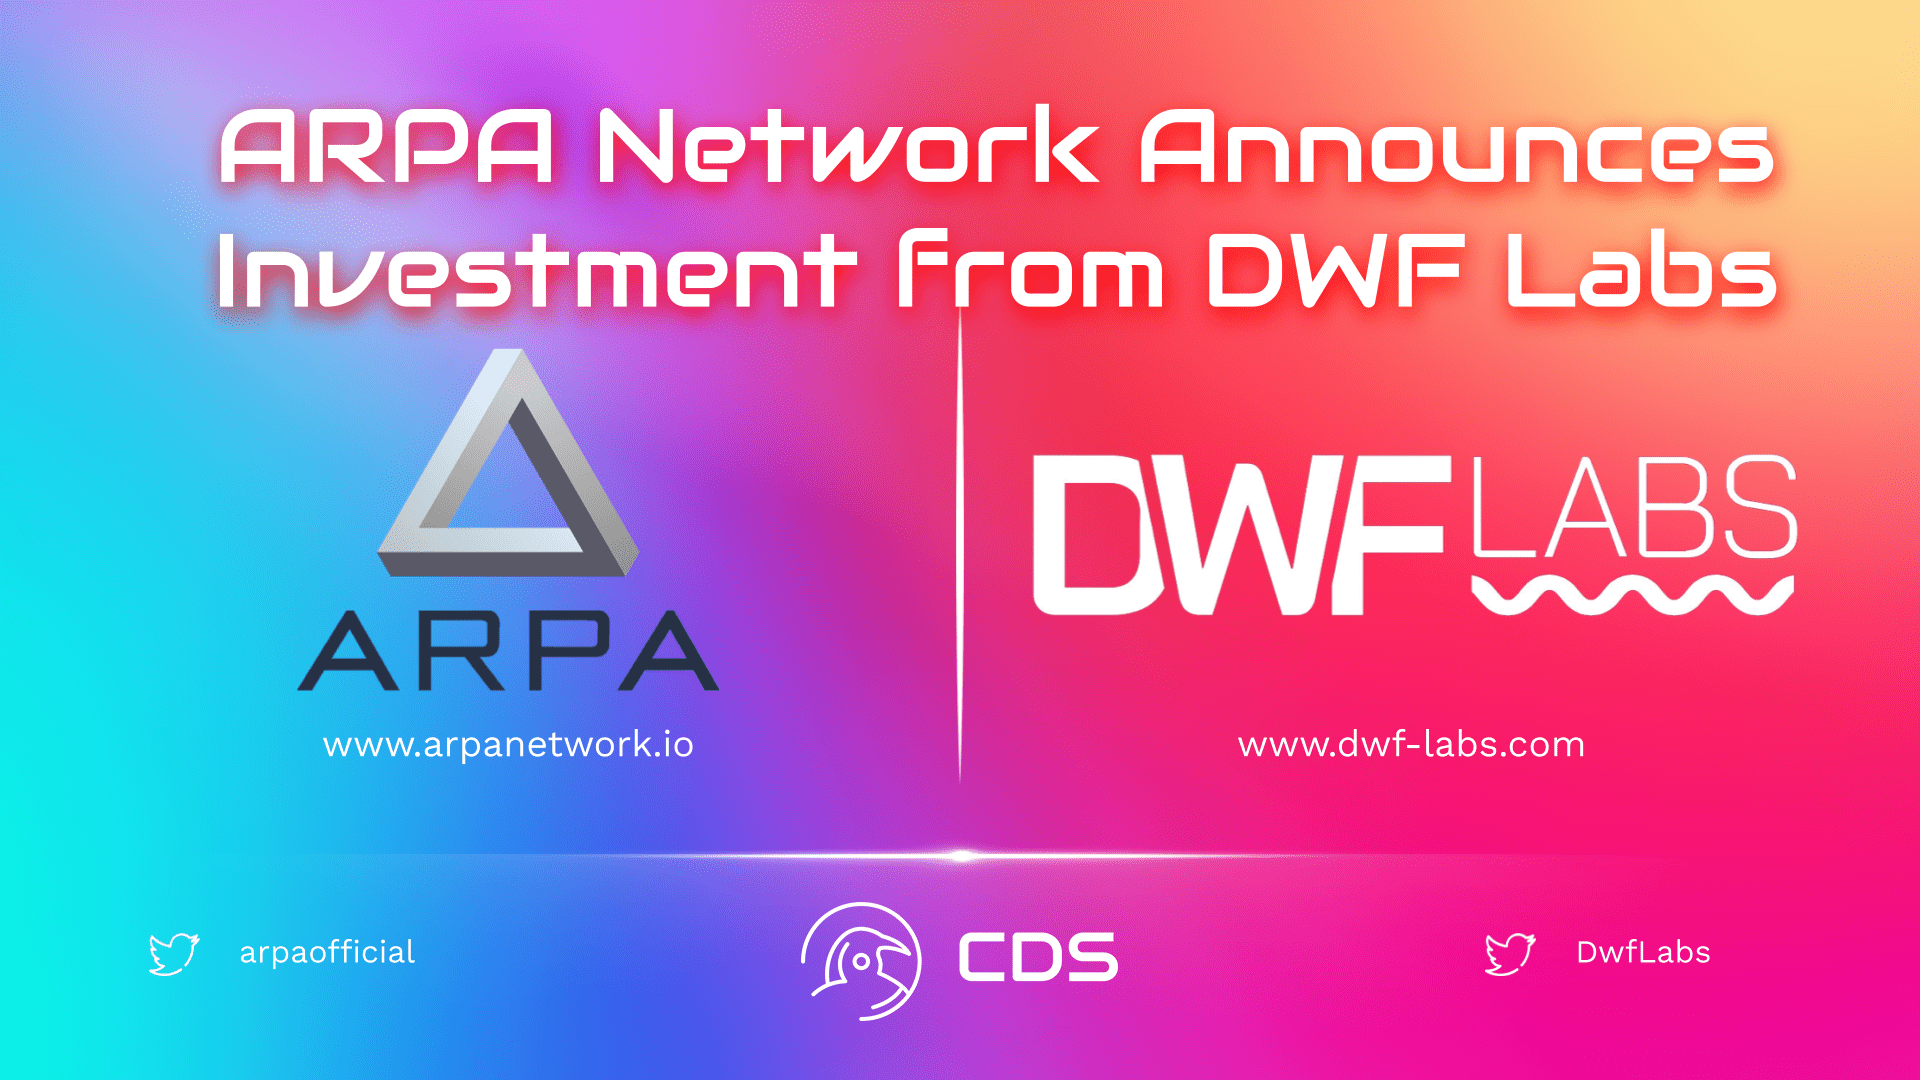 ARPA Network Announces Investment from DWF Labs